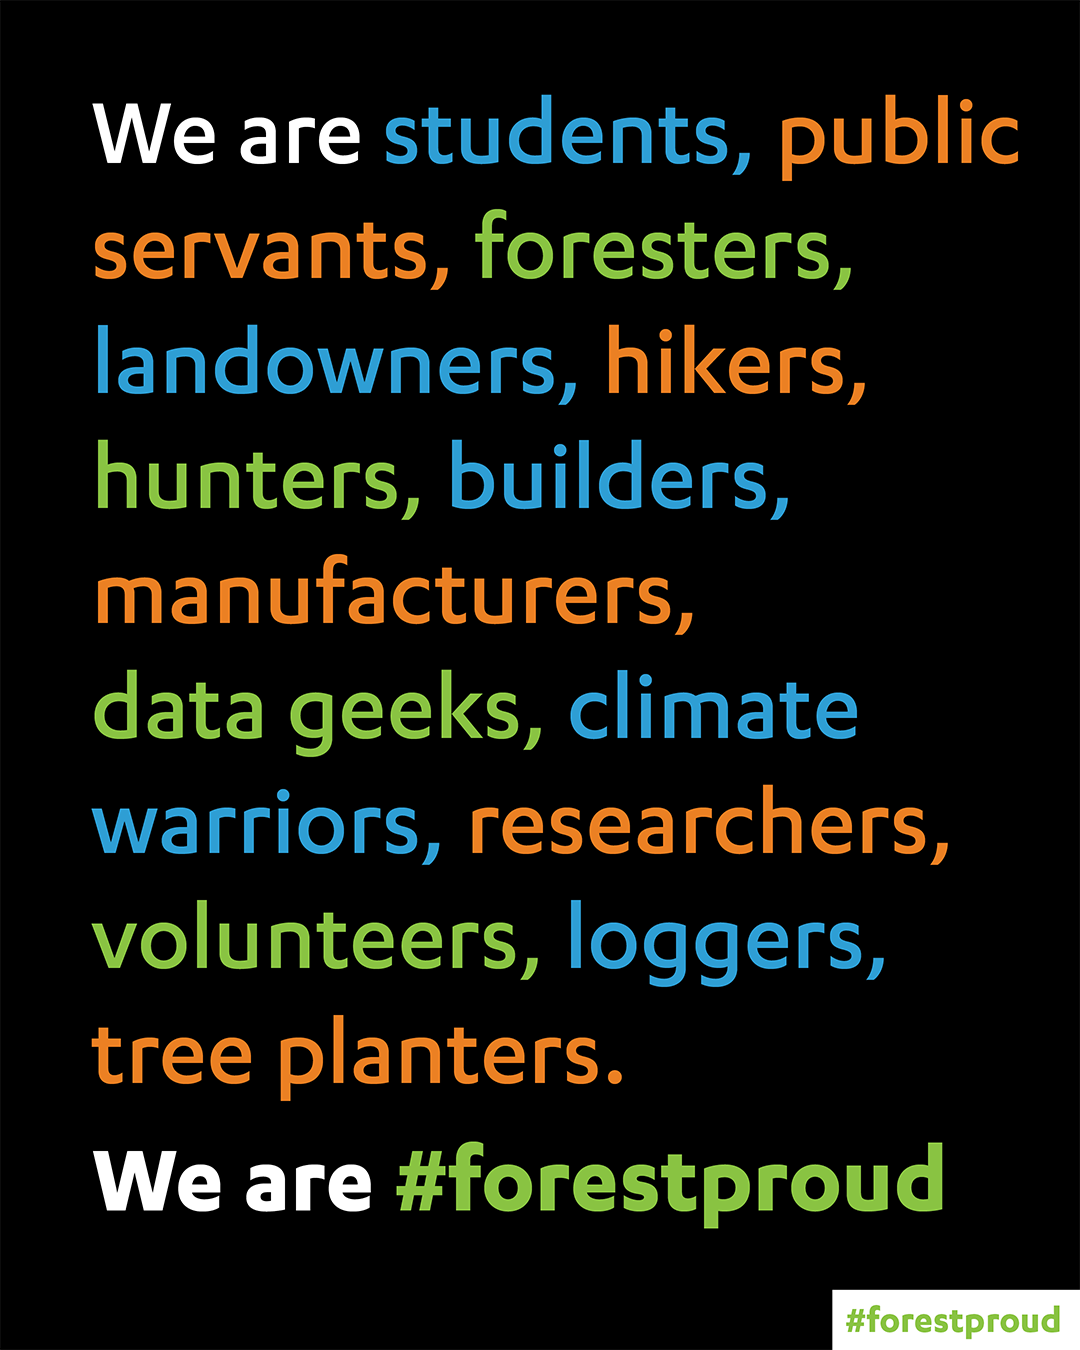 We Are… #forestproud